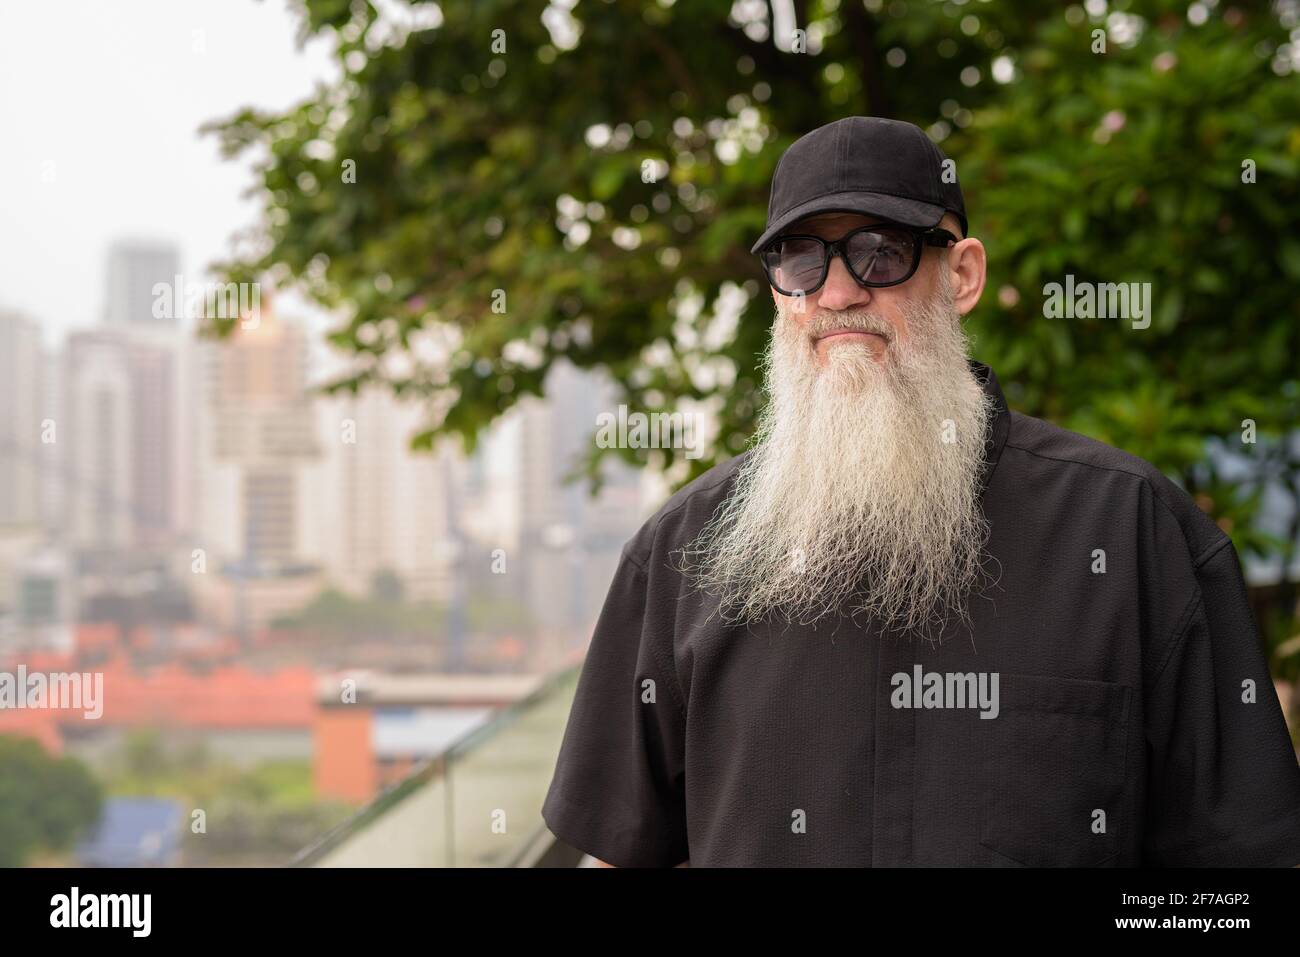 Portrait of man bald man with long gray beard thinking outdoors at rooftop garden Stock Photo